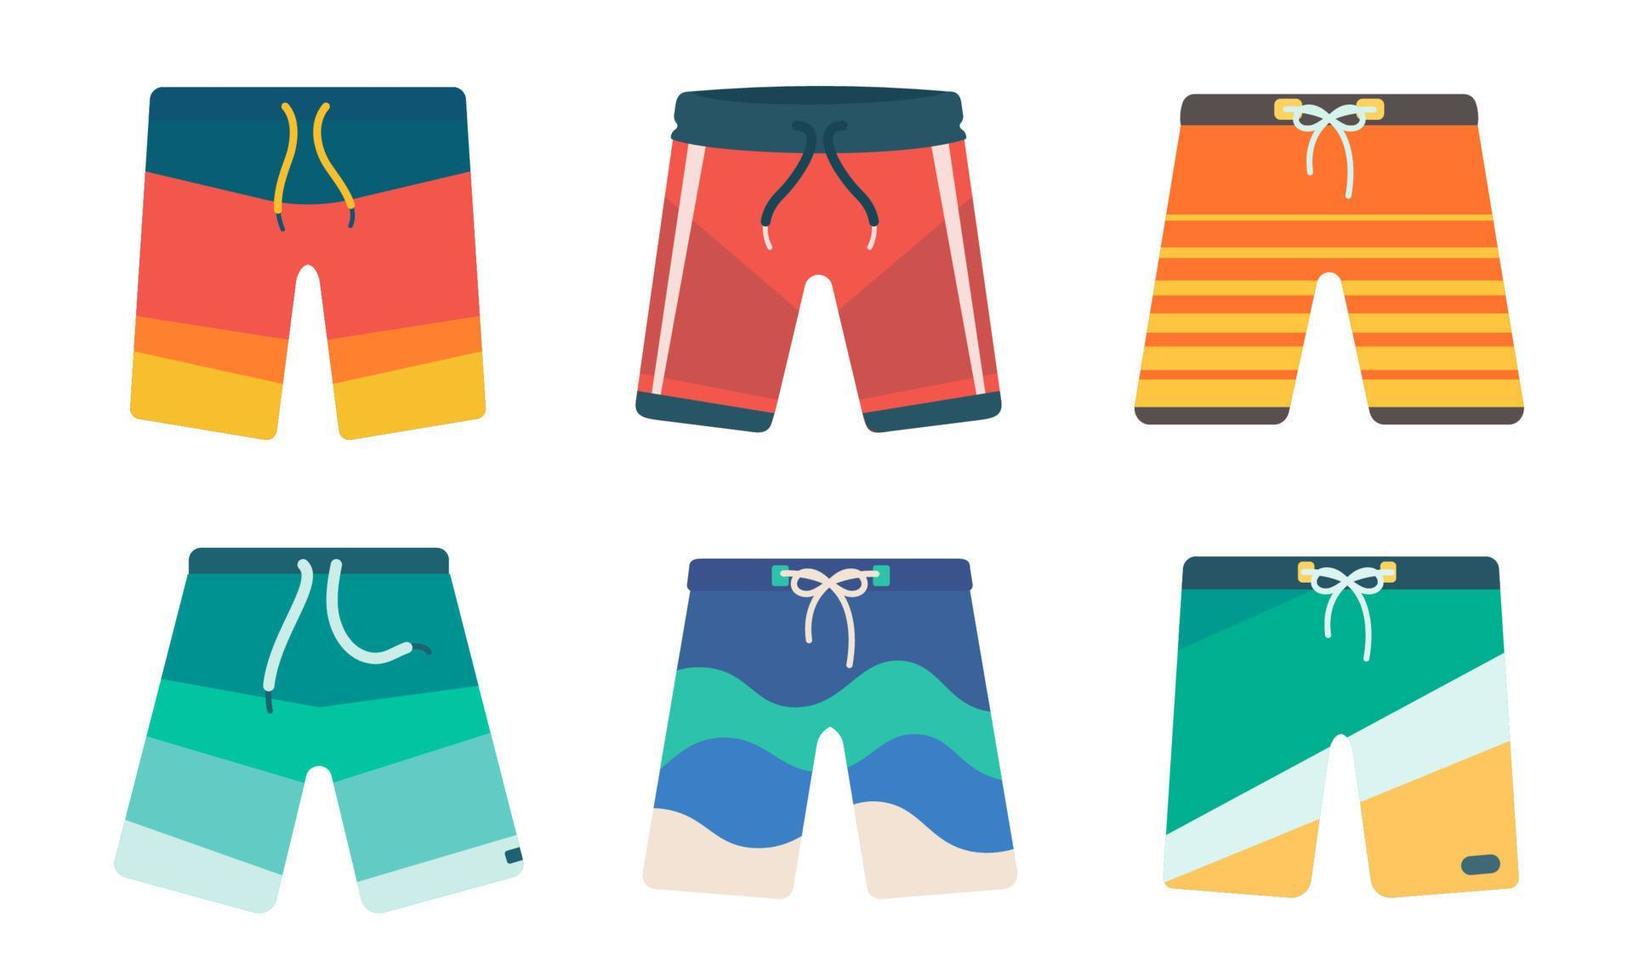 Surf pants. Clothing for water activities in surfing. summer seaside relaxation vector